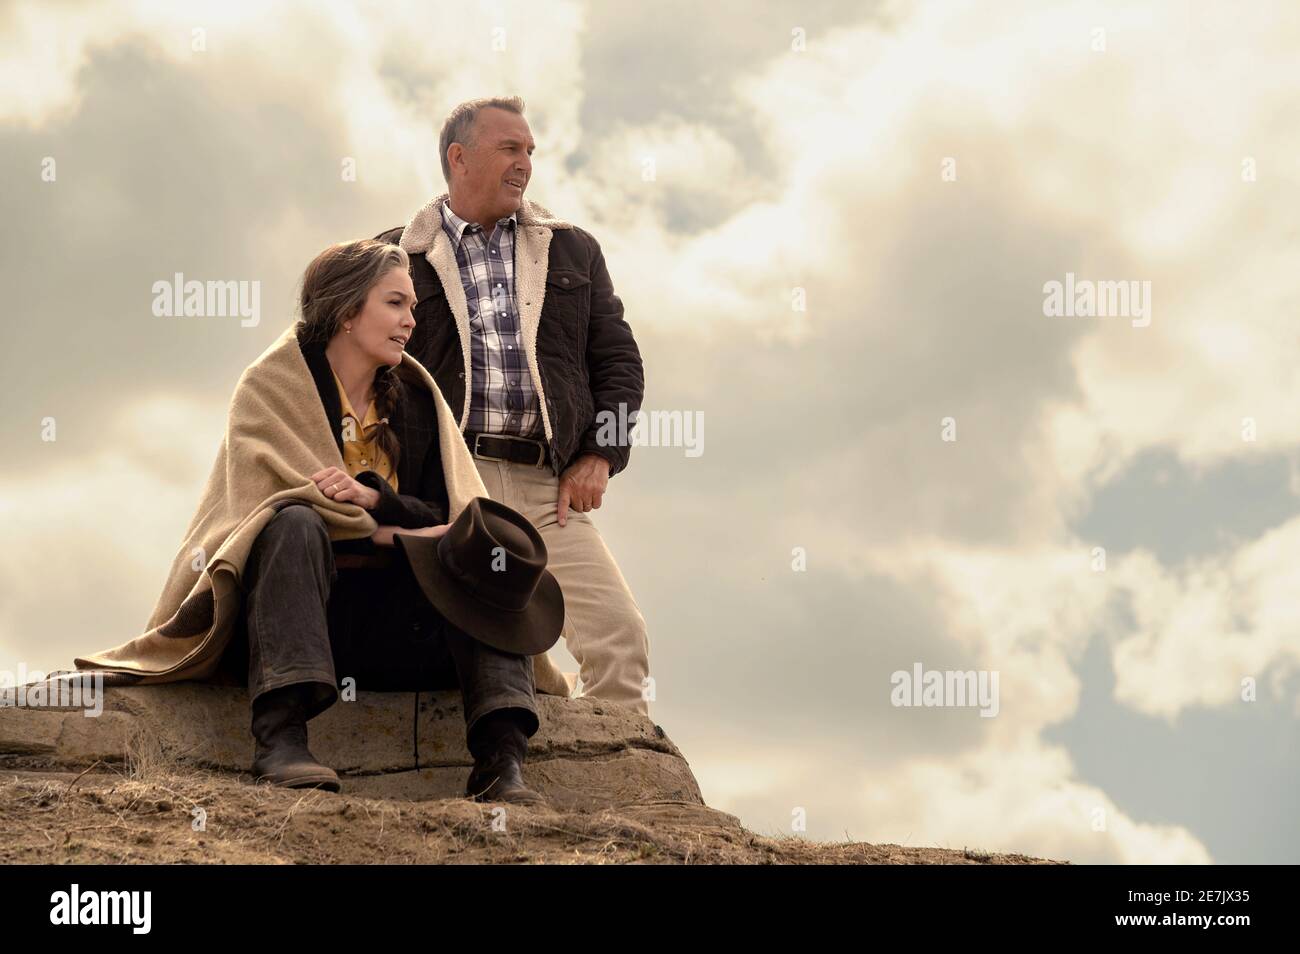 KEVIN COSTNER and DIANE LANE in LET HIM GO (2020), directed by THOMAS BEZUCHA. Credit: Mazur / Kaplan Company / Album Stock Photo